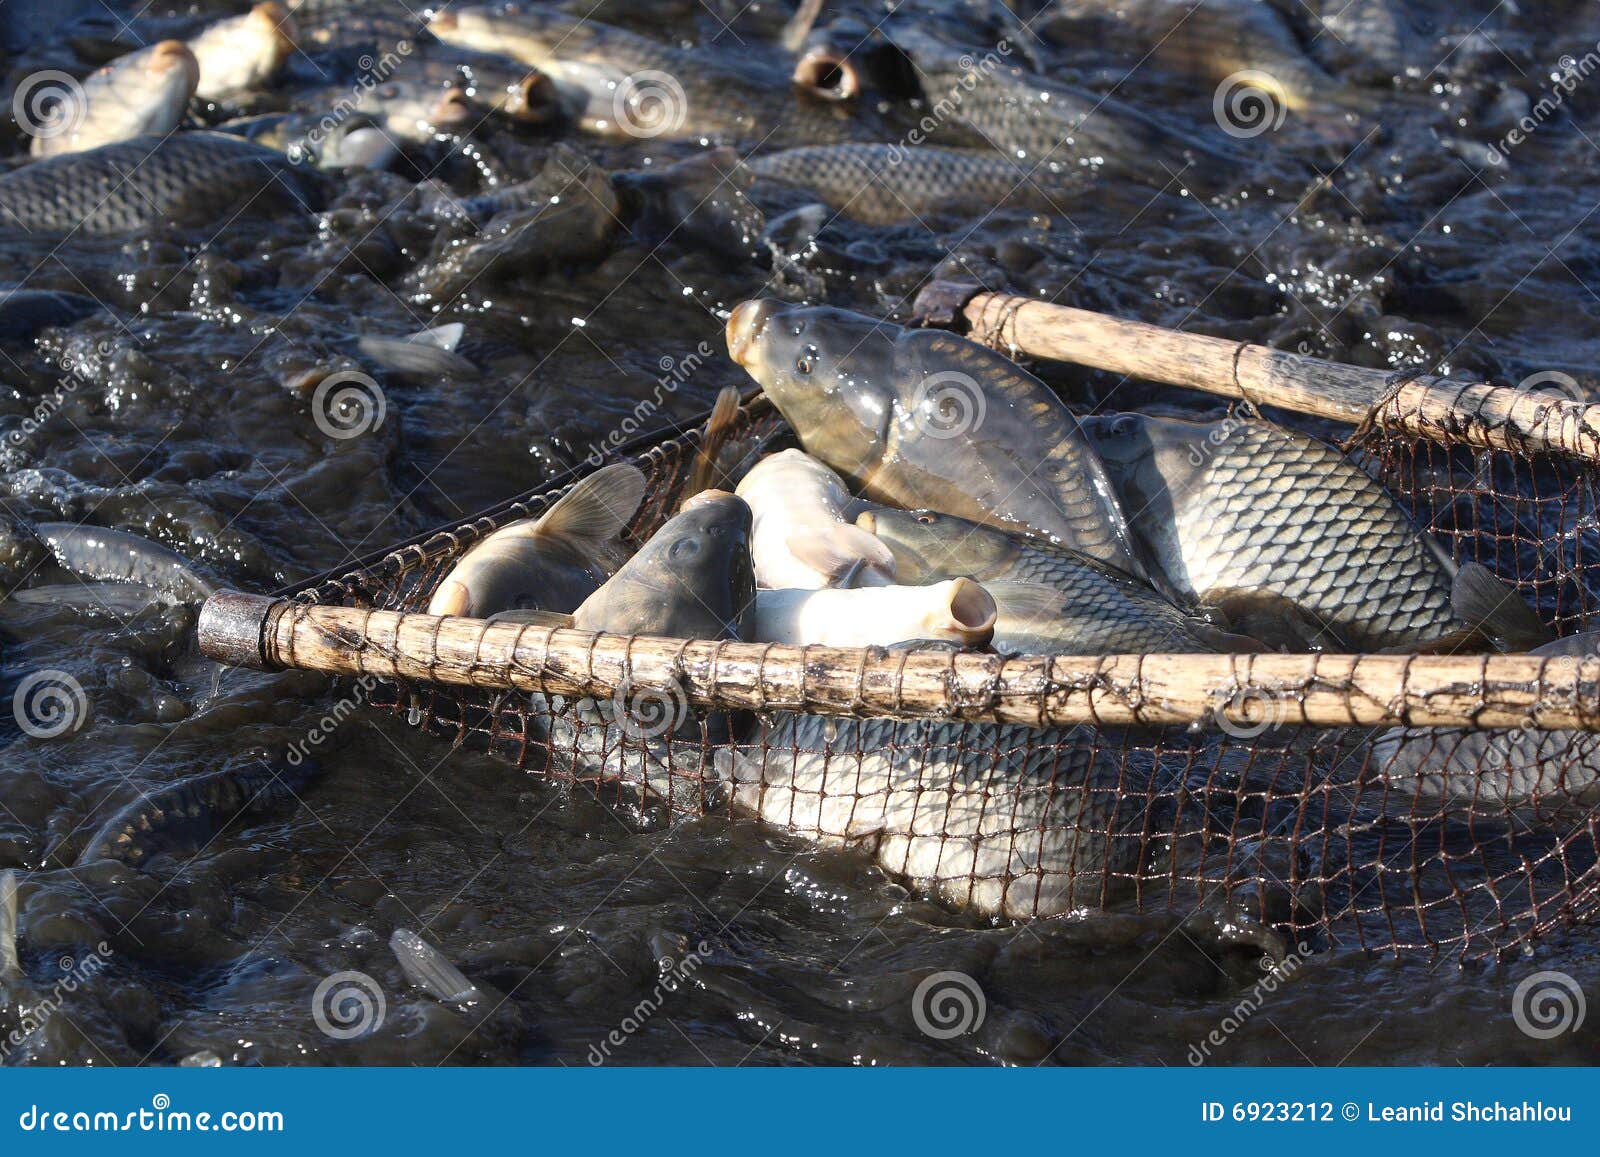 Image result for catching of fish